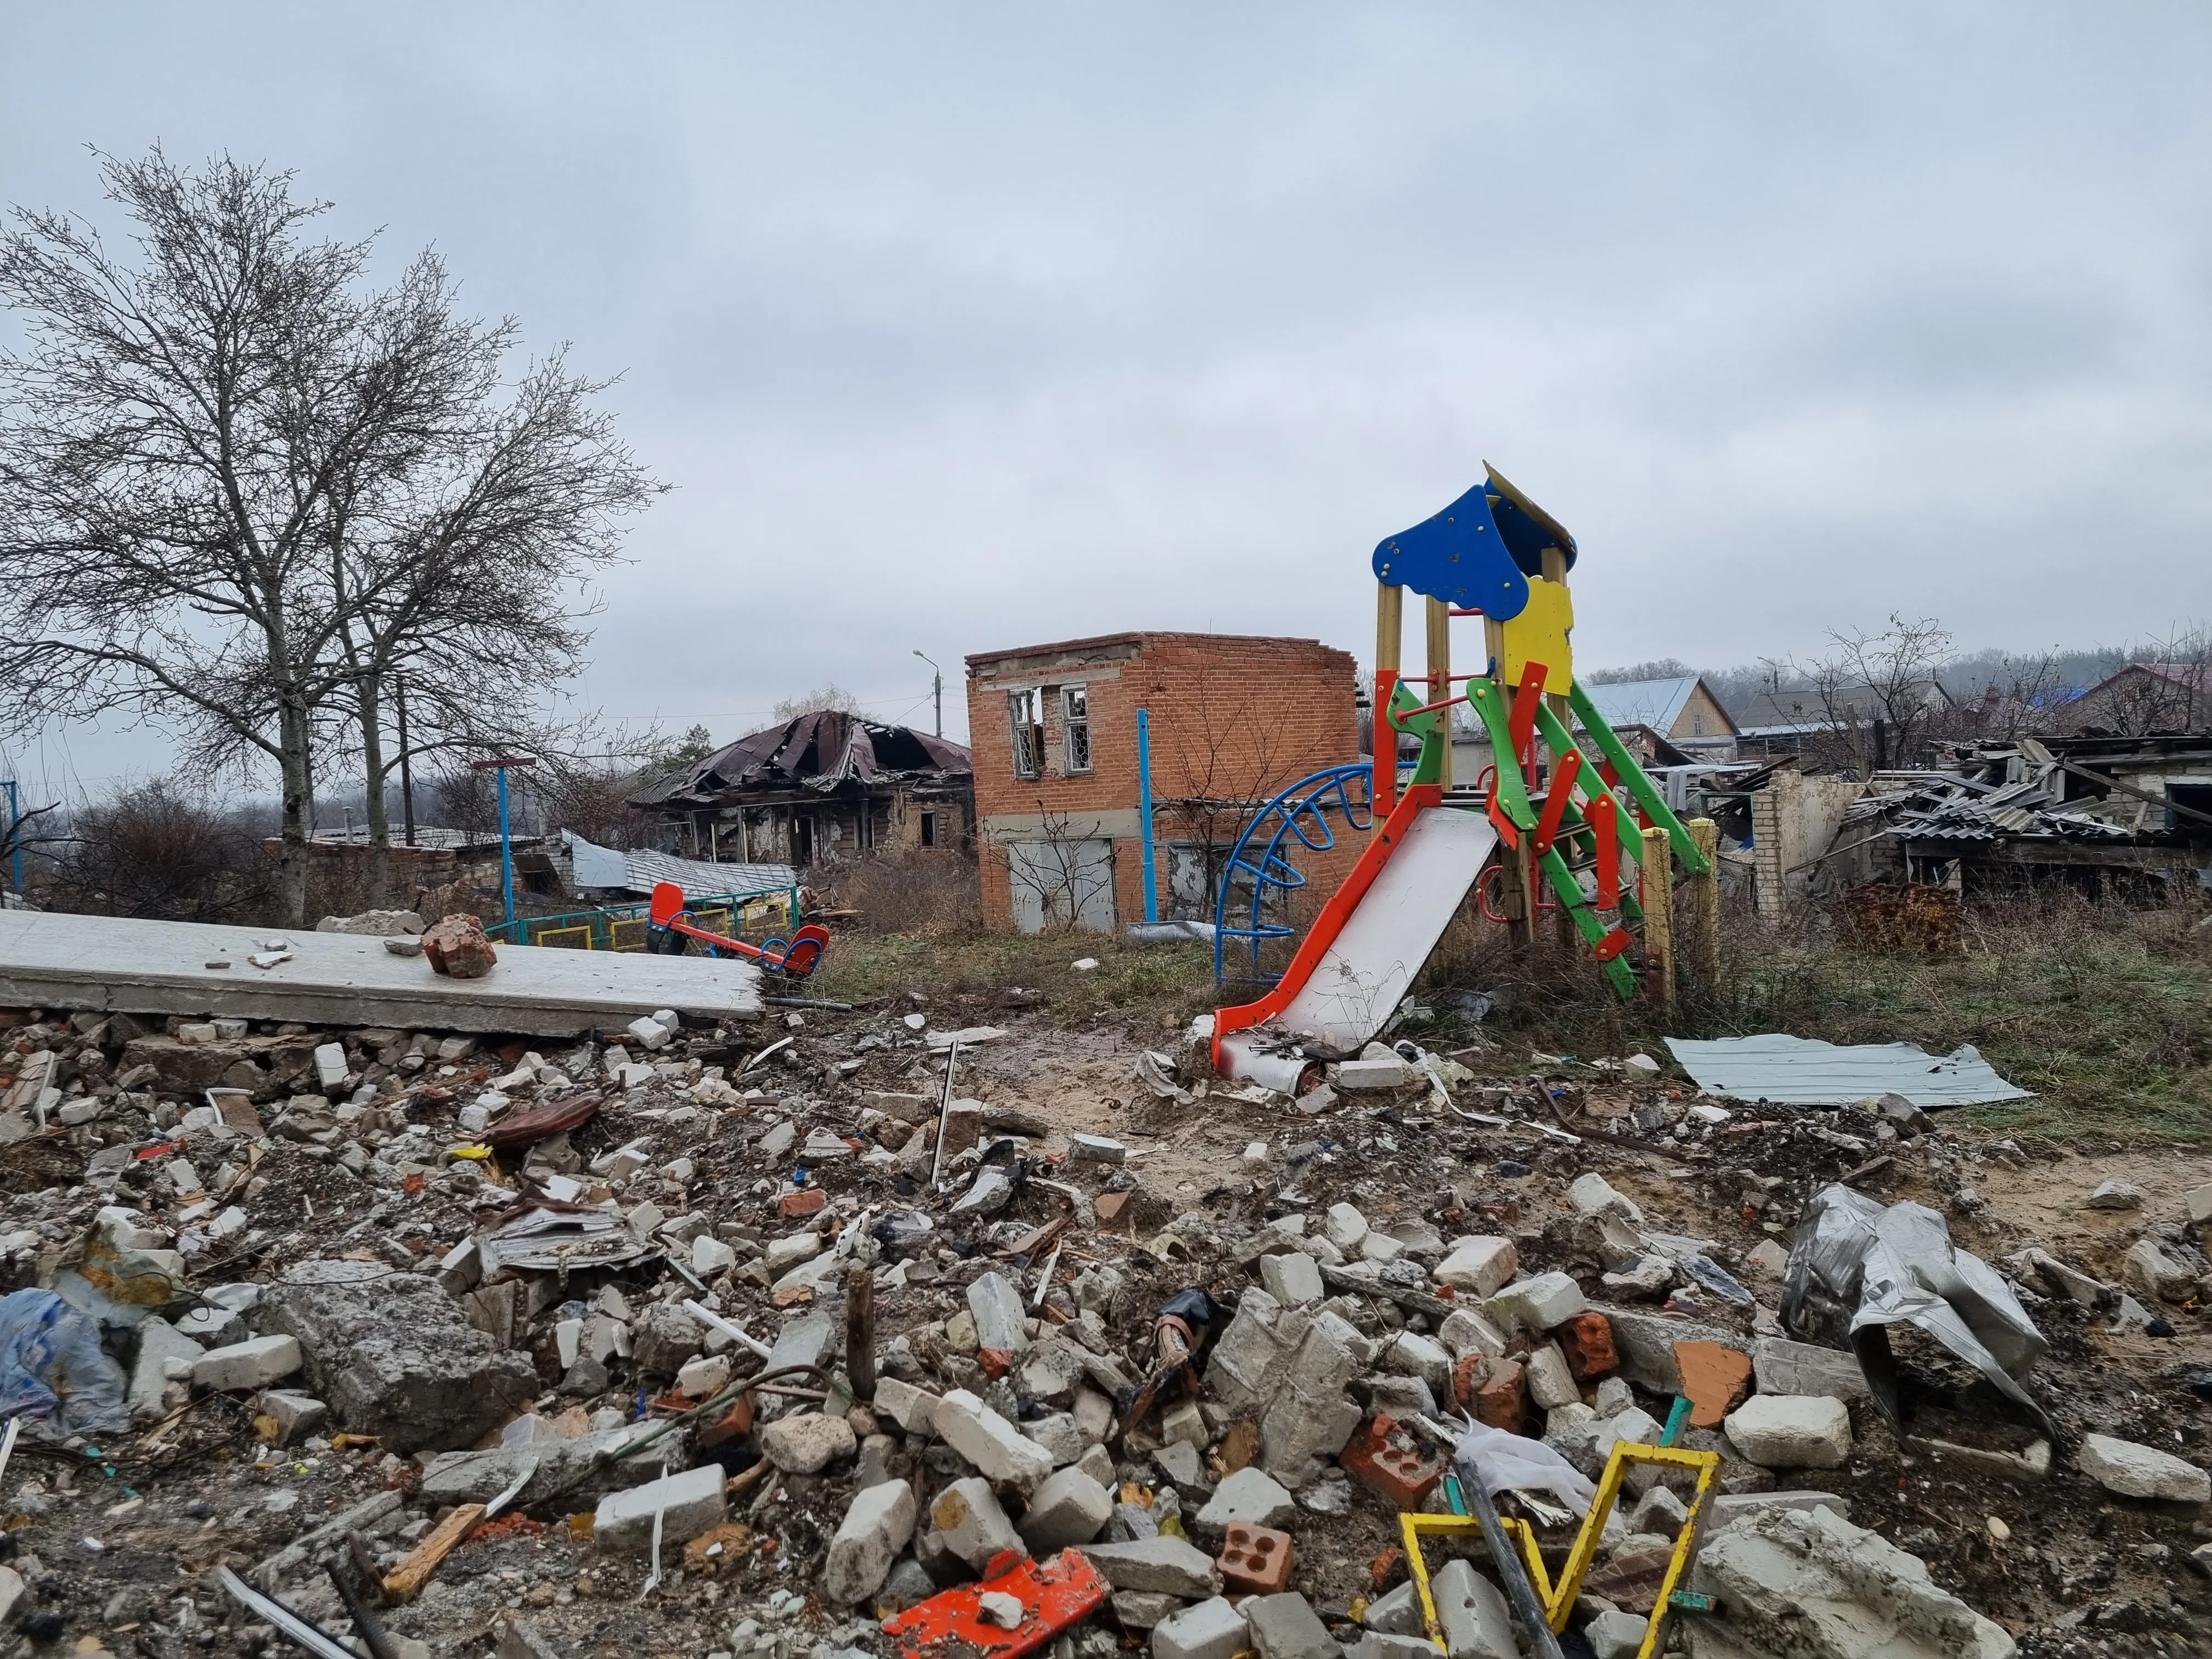 A playground destroyed by bombs among the ruins in Izium, Ukraine. Andrea Gagliarducci / CNA